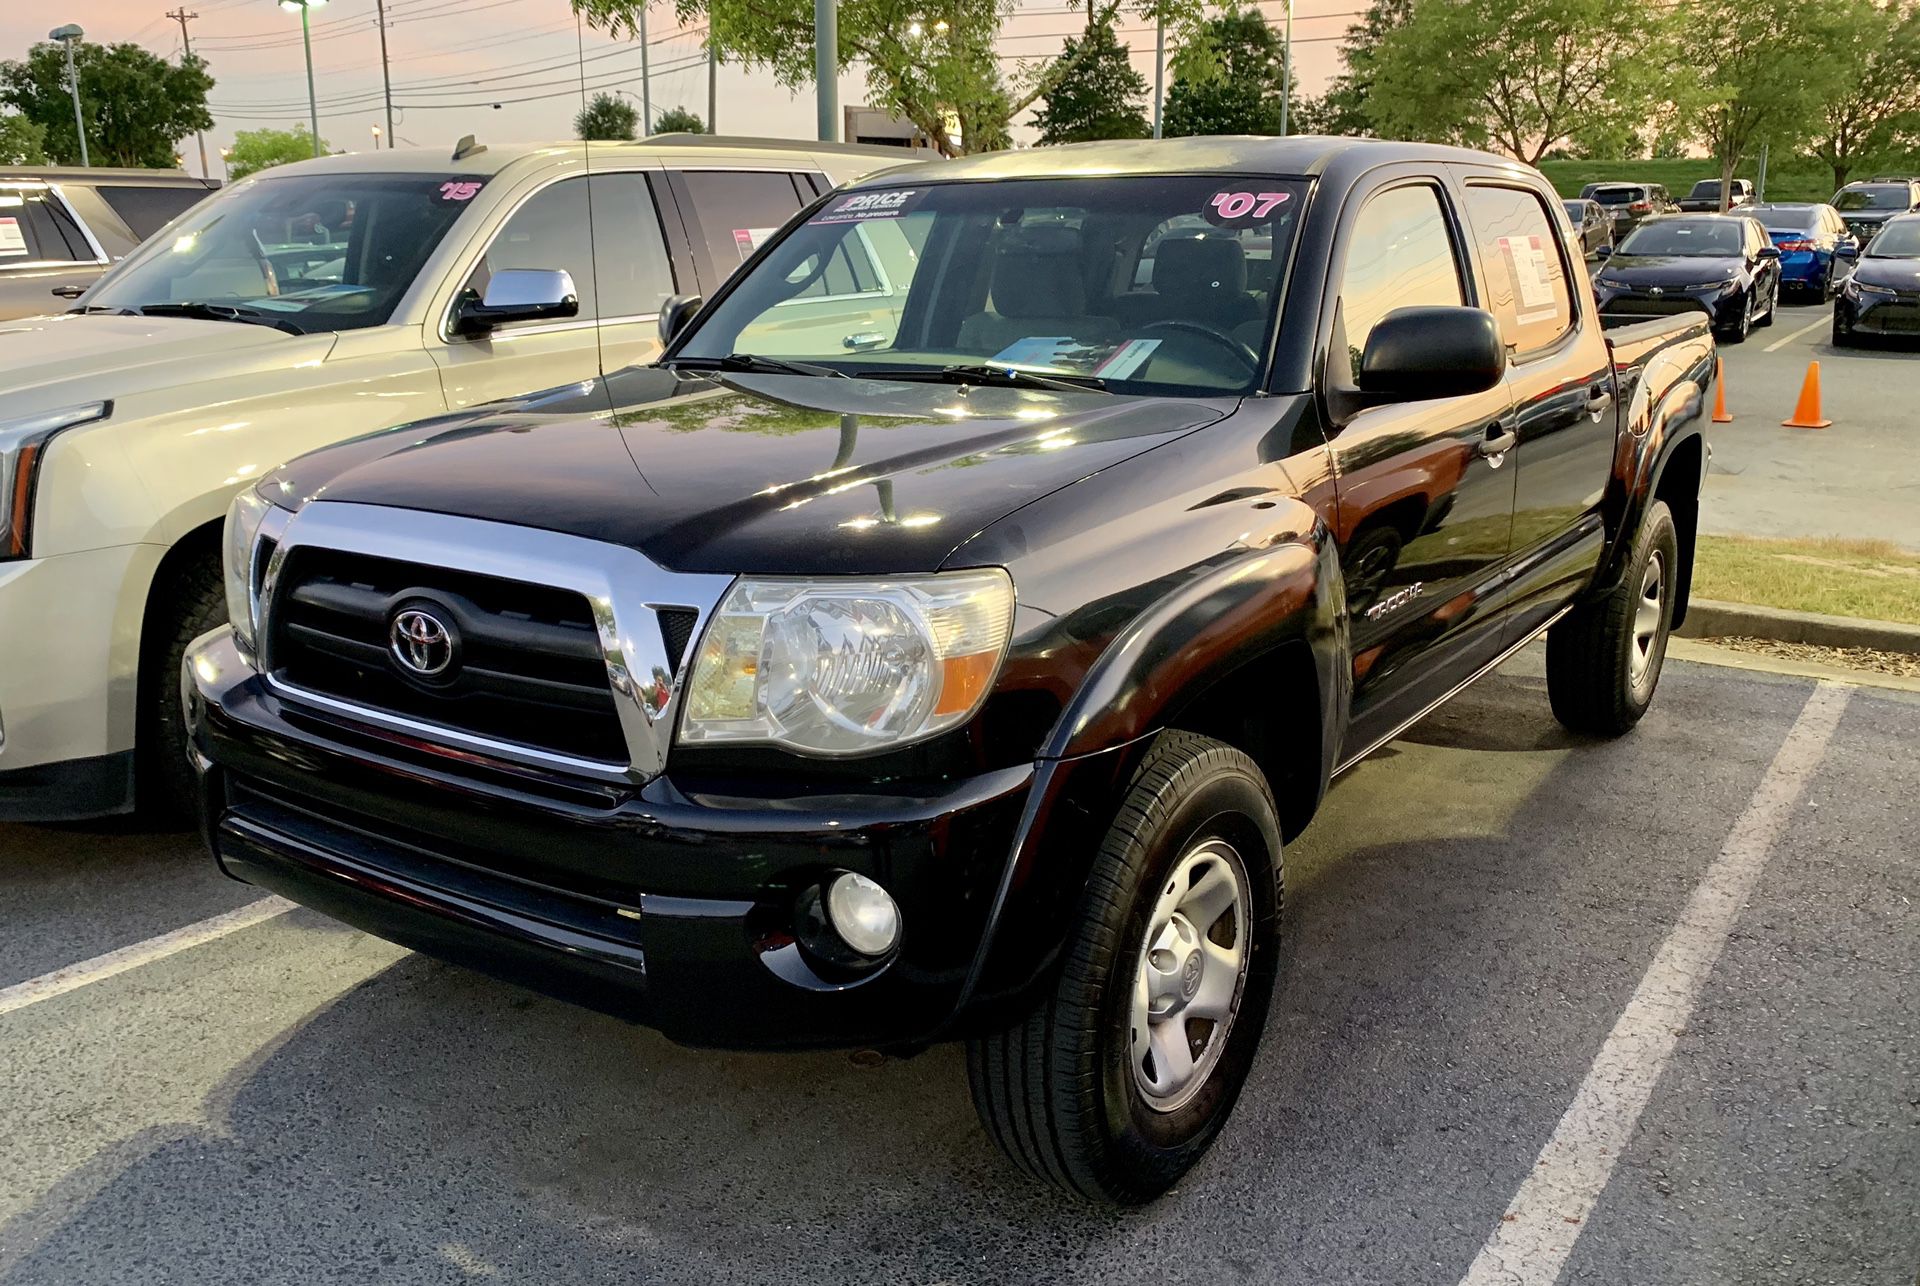 Toyota Tacoma 2007 PreRunner. Take it to your house with SSN or Tax ID, Driver License and just $1000 / Llévatela a tu casa con tan solo el Social Se